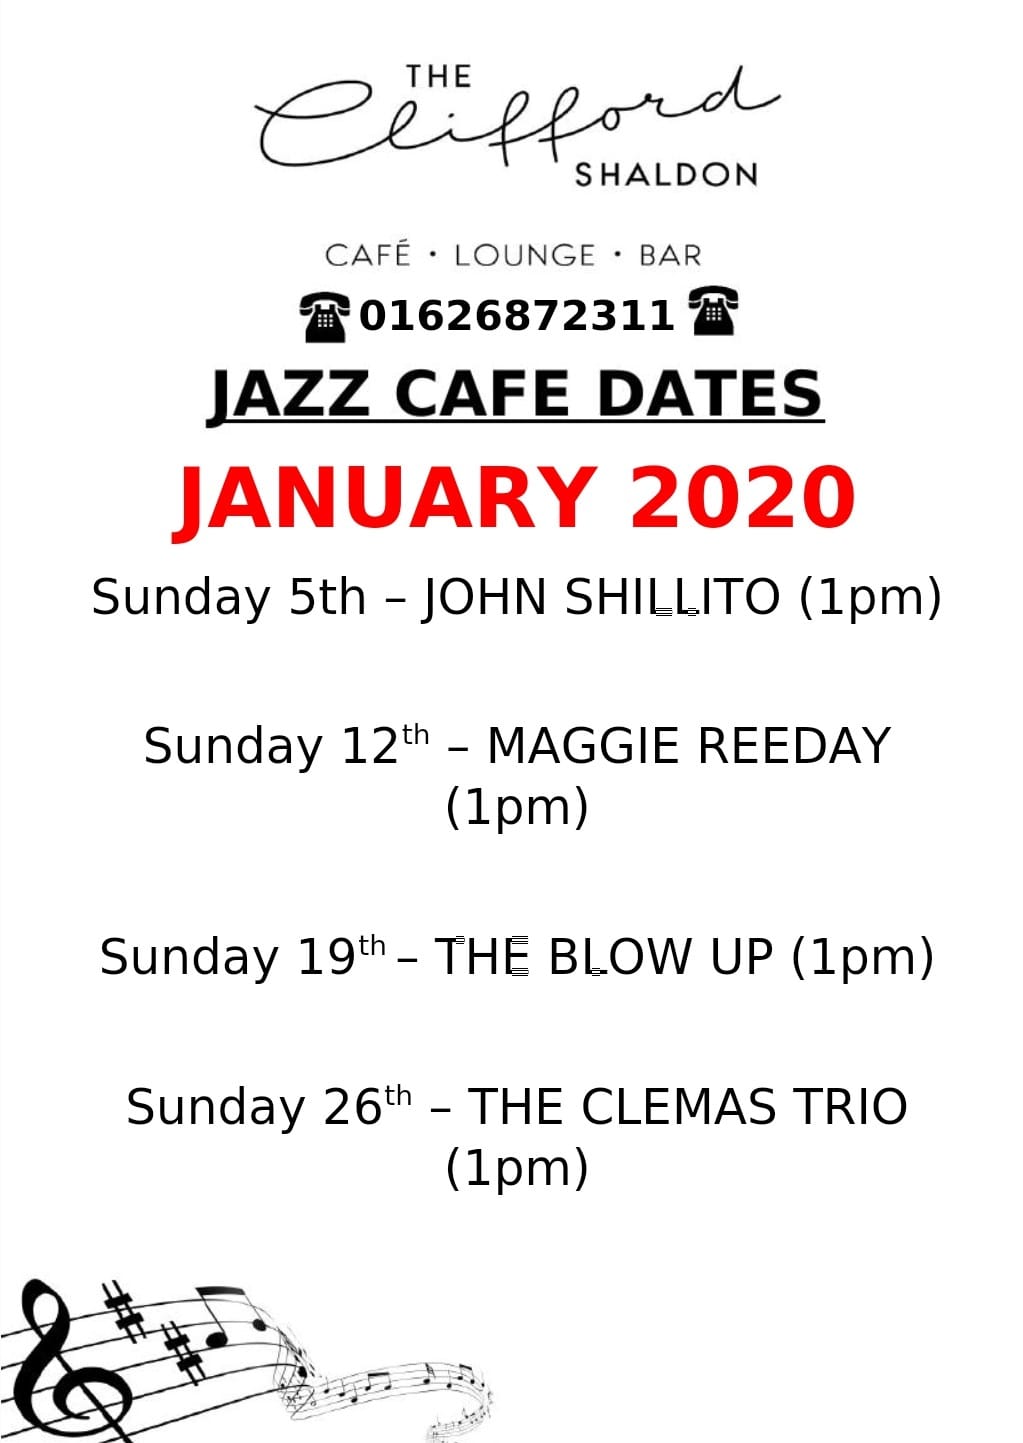 The CLIFFORD  -live Jazz for January